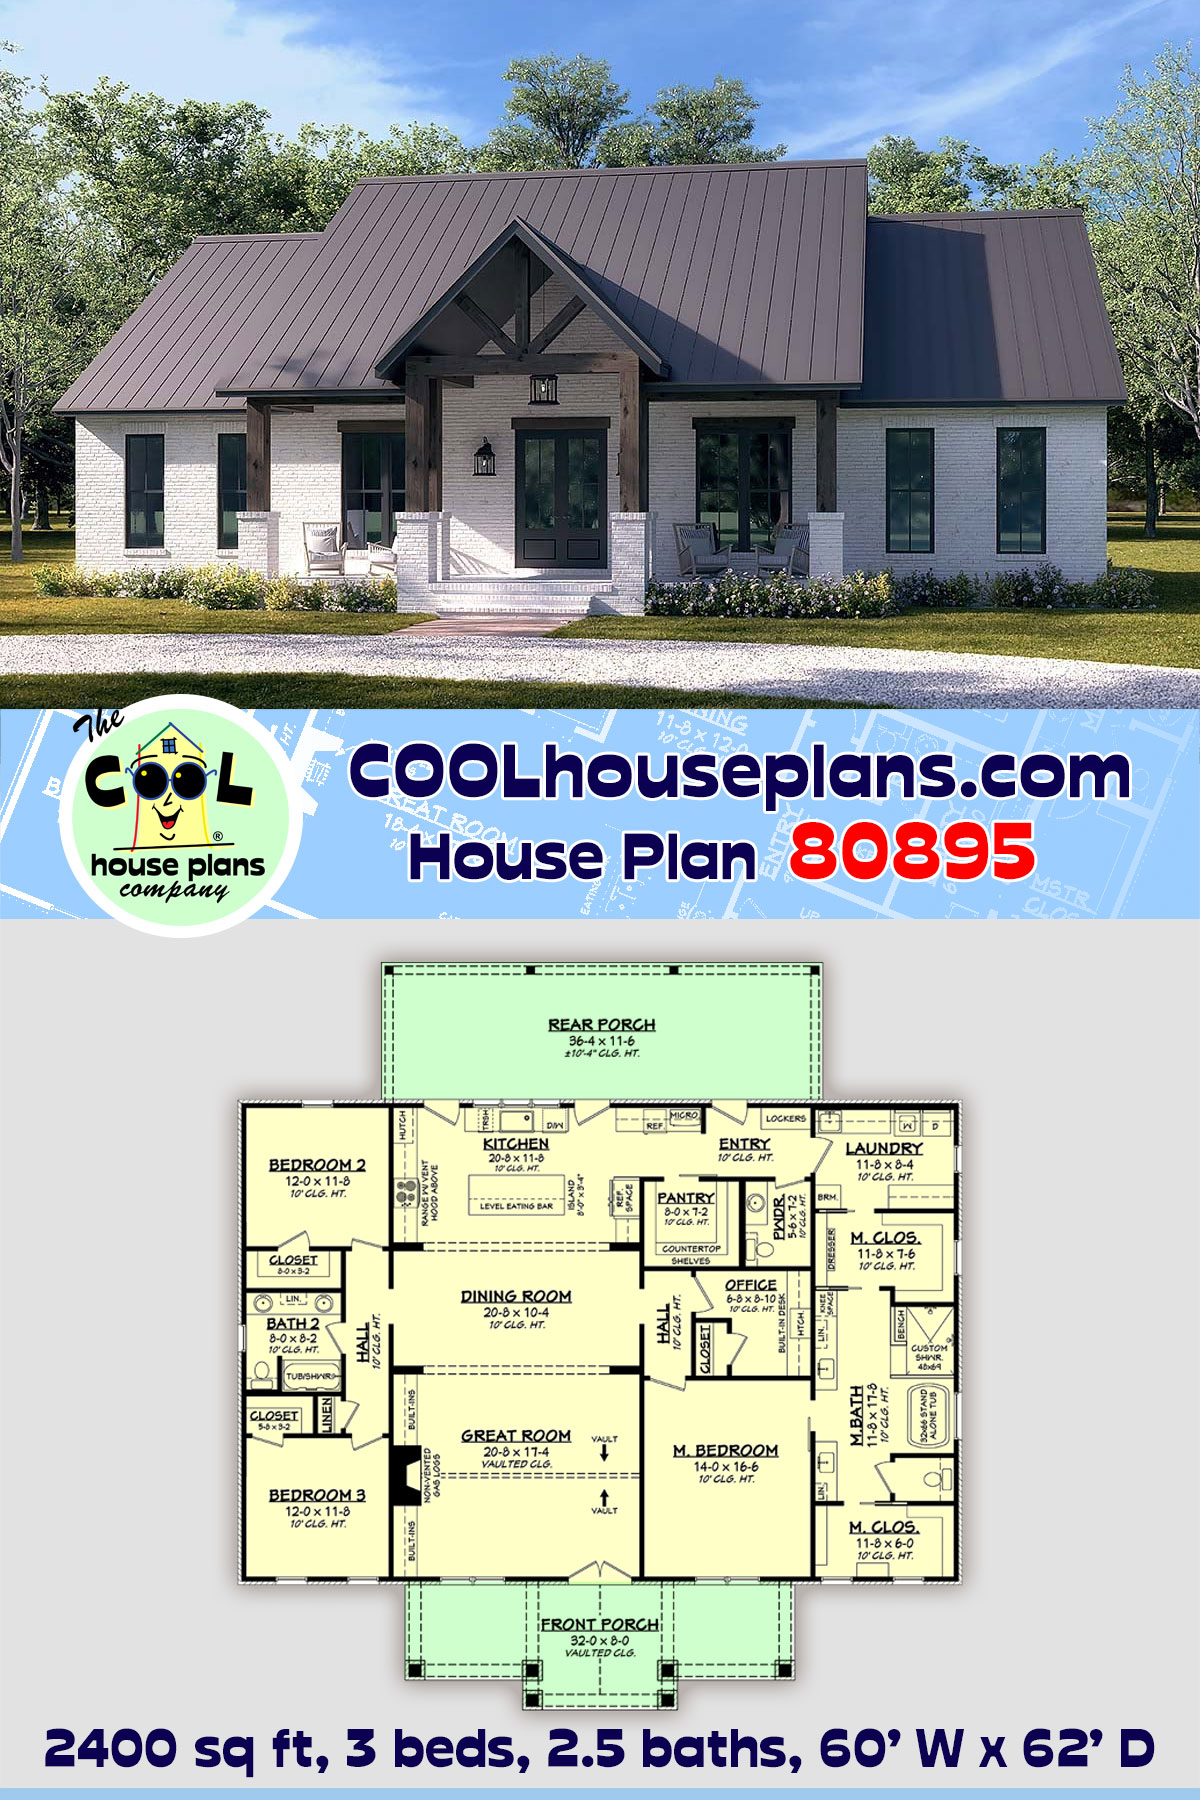 Country, Craftsman, Farmhouse, Traditional House Plan 80895 with 3 Beds, 3 Baths